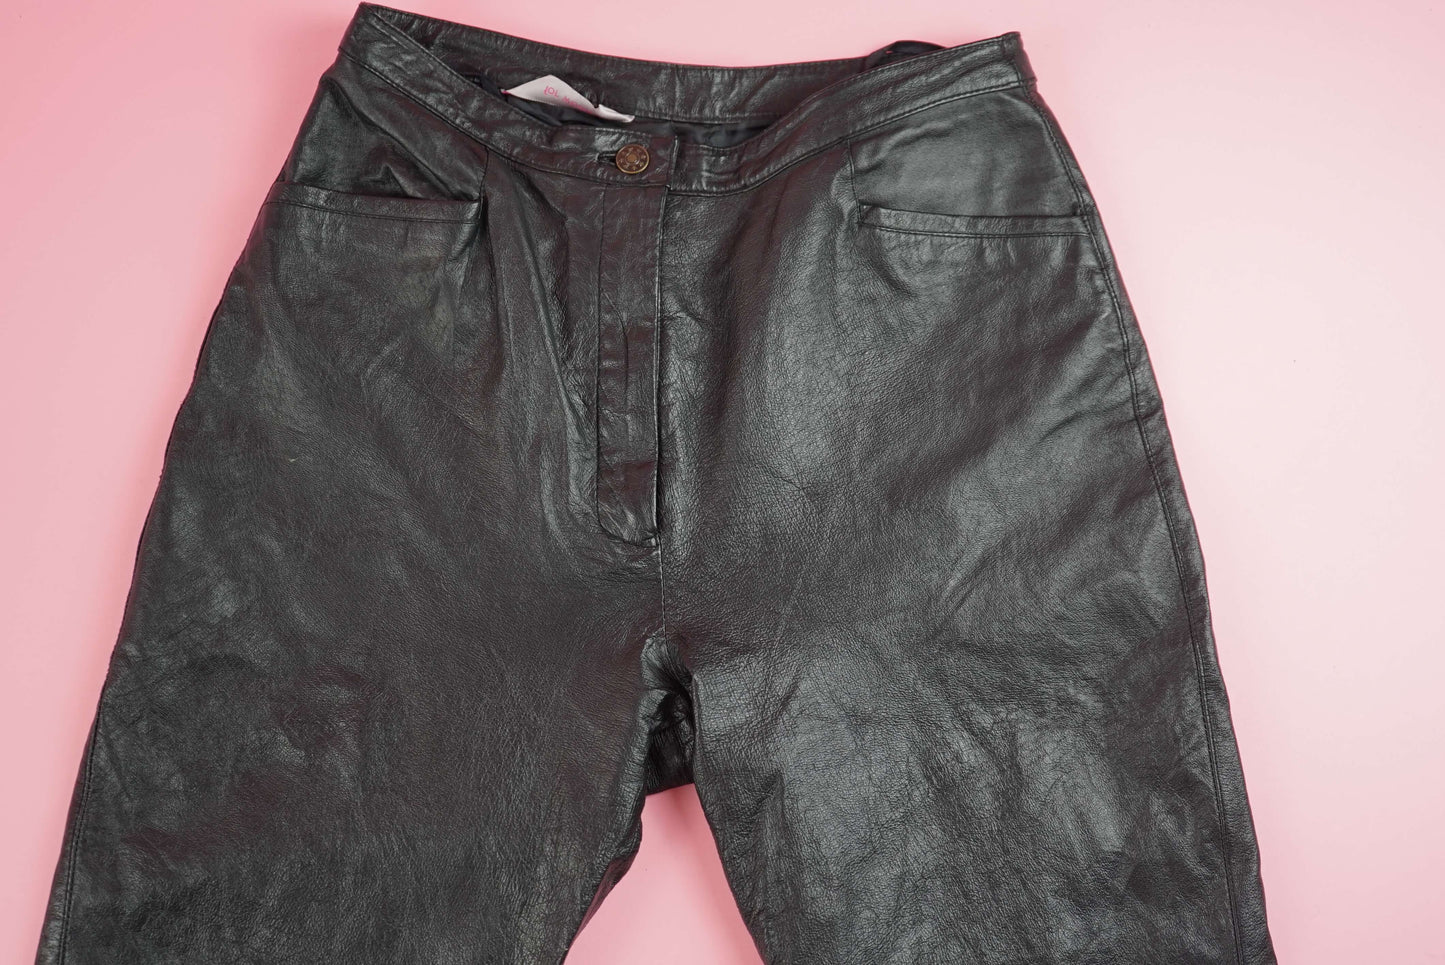 Black High Waisted Women's Leather Trousers Vintage Size M W31-32 UK Size 12 | EU size 42